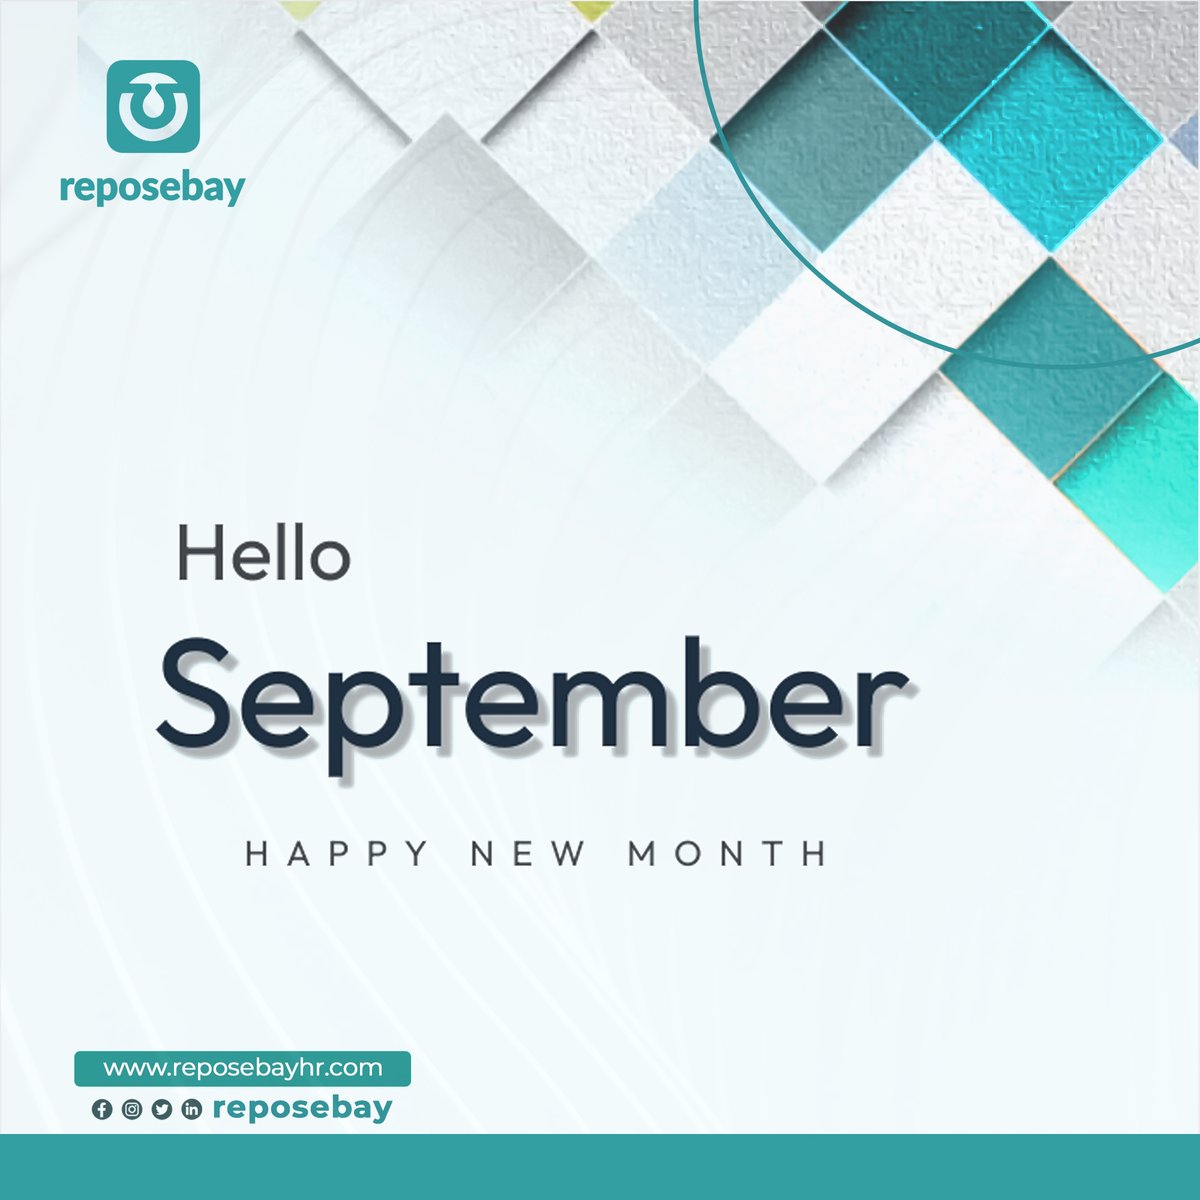 Welcome to the month of September, We wishing you all a wonderful month ahead.

Ready to revolutionize your HR game?

Book a demo now for FREE.

Let help you do more with our HR TECH solution

#HappyNewMonth #HRSoftware #FutureofHR #HRManagement #HRRevolution #SoftwareDemo #hr